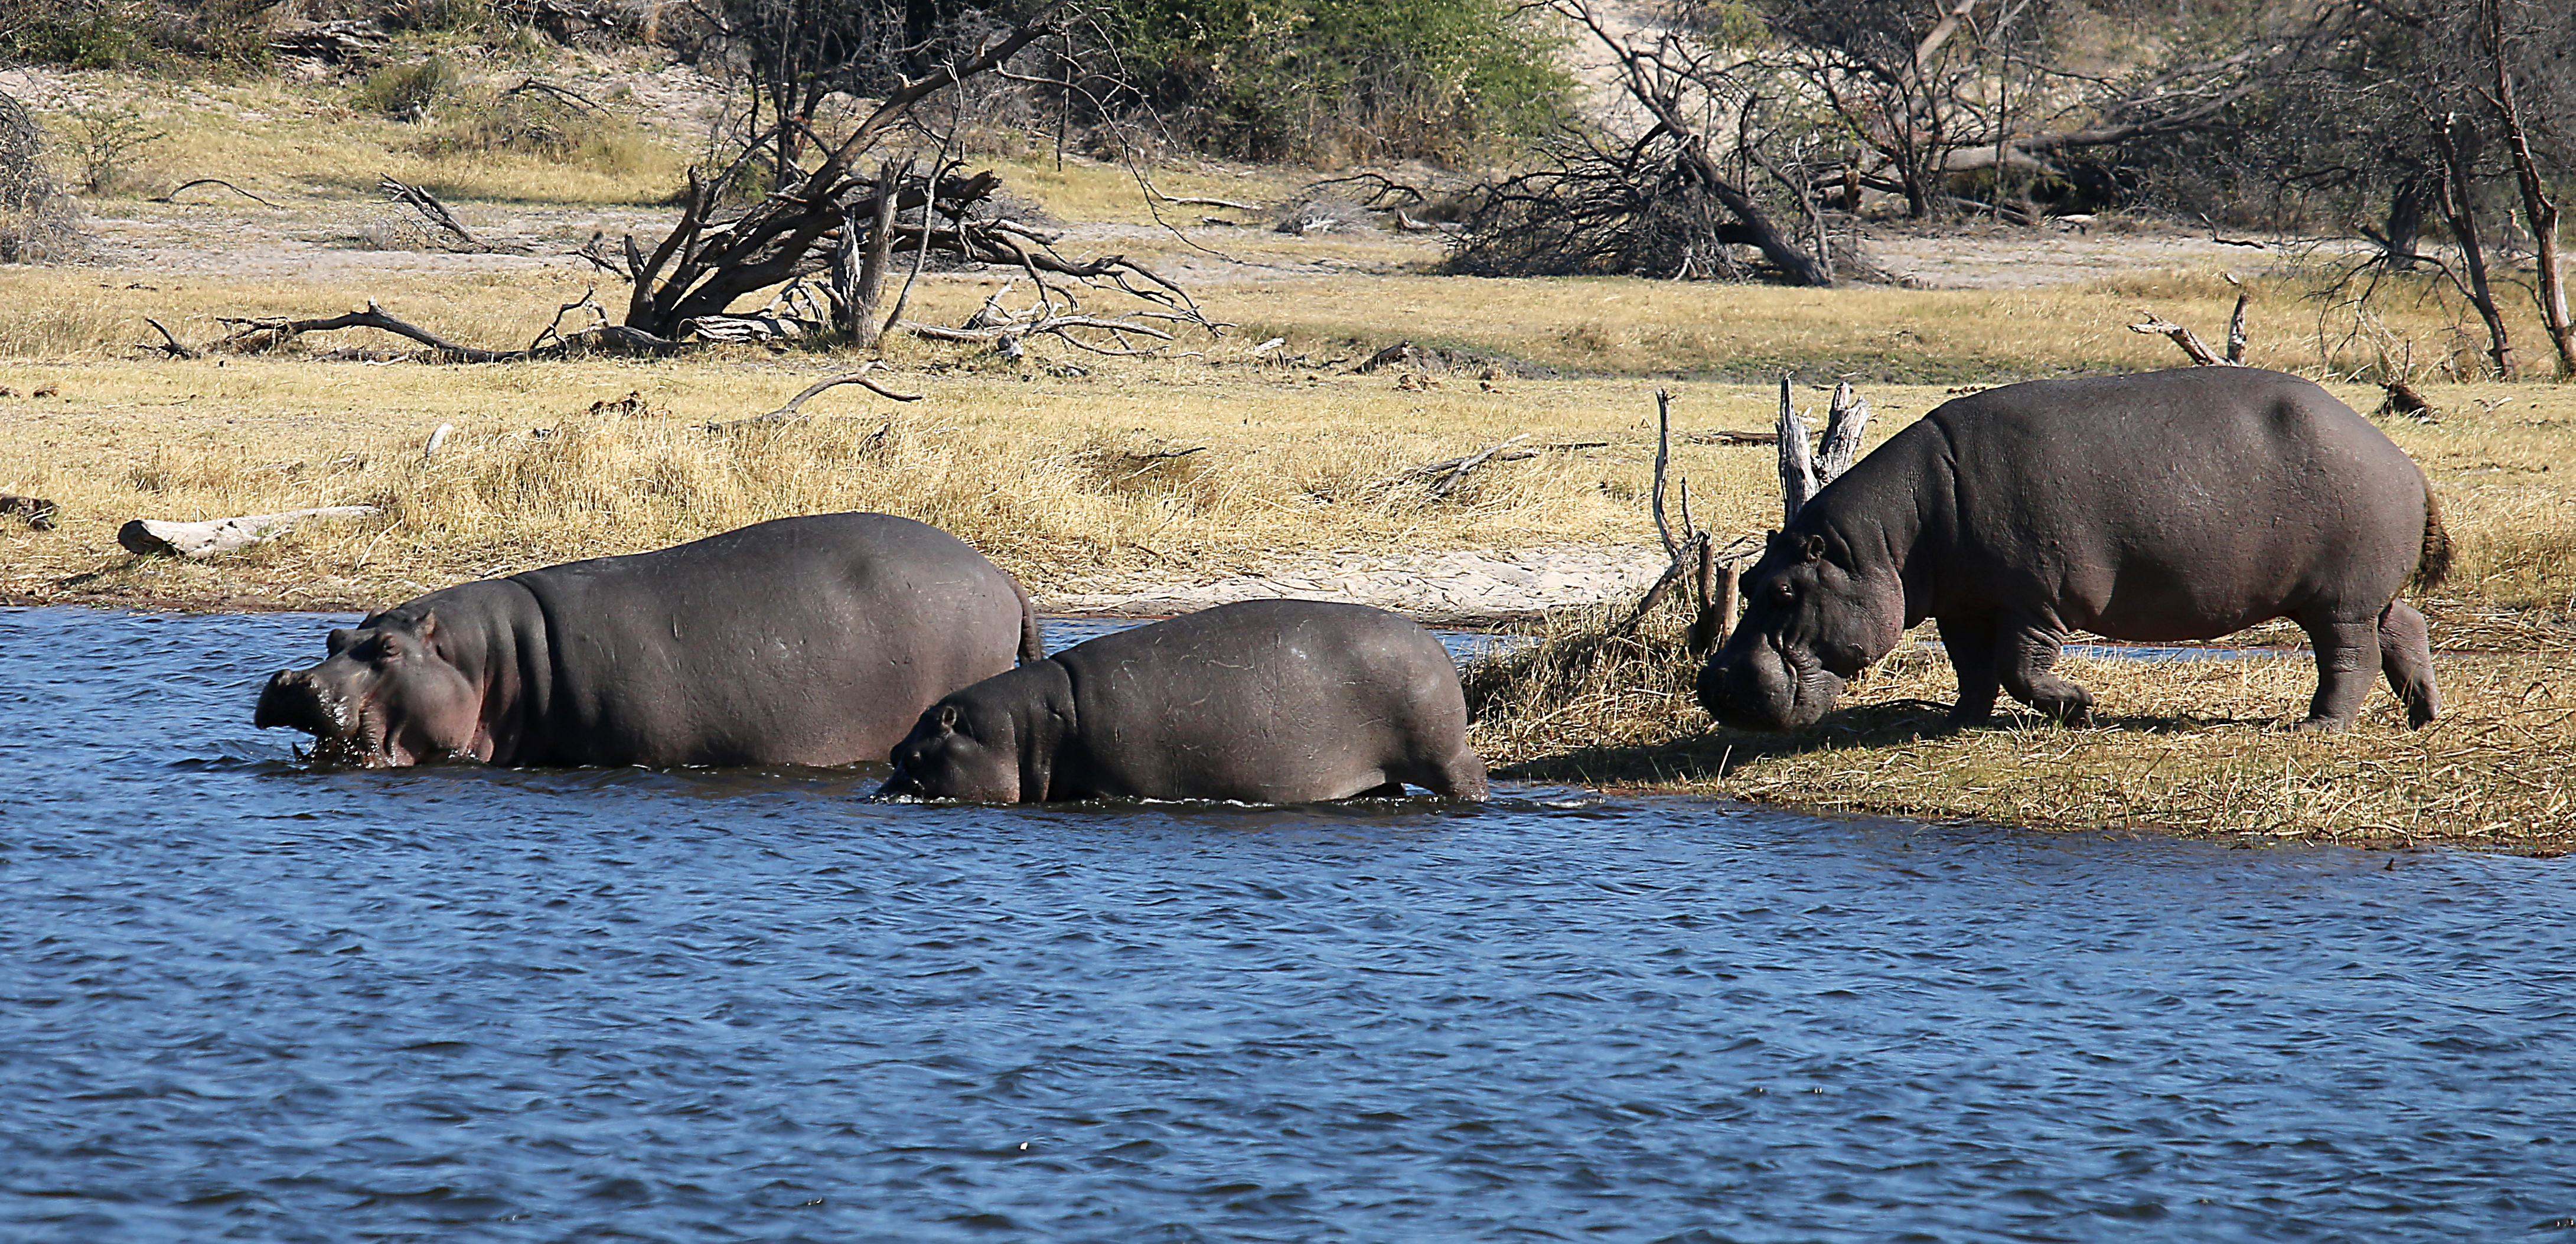 Hippo Pool, now you see them.